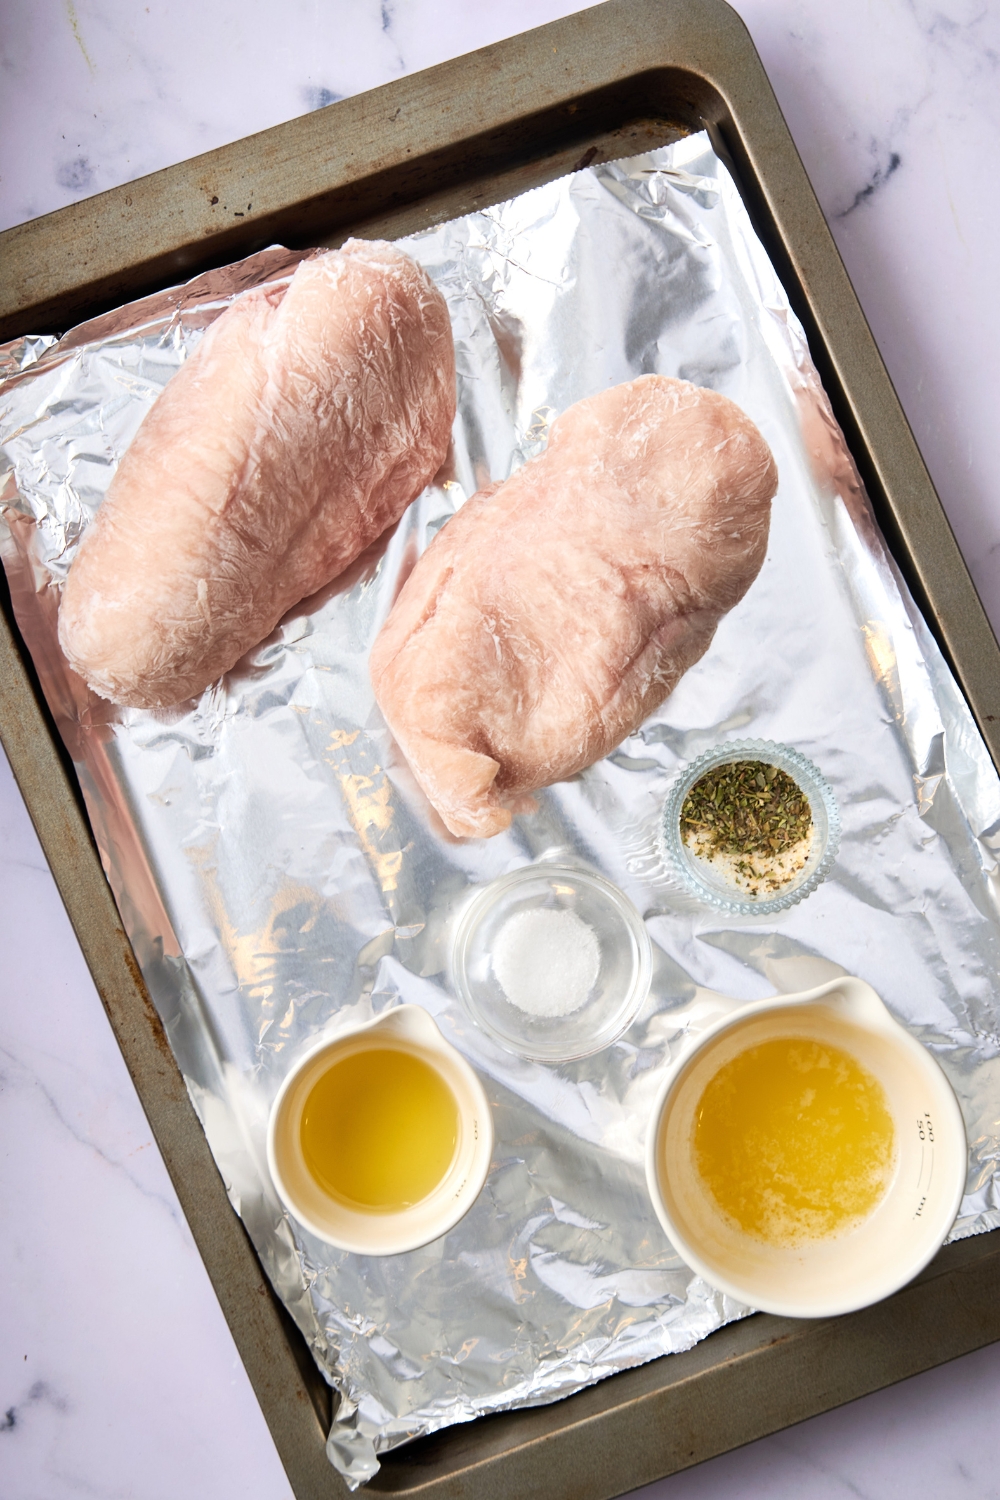 Two frozen chicken breasts and small cups full of seasonings, butter, and oil are on a foil lined baking sheet.